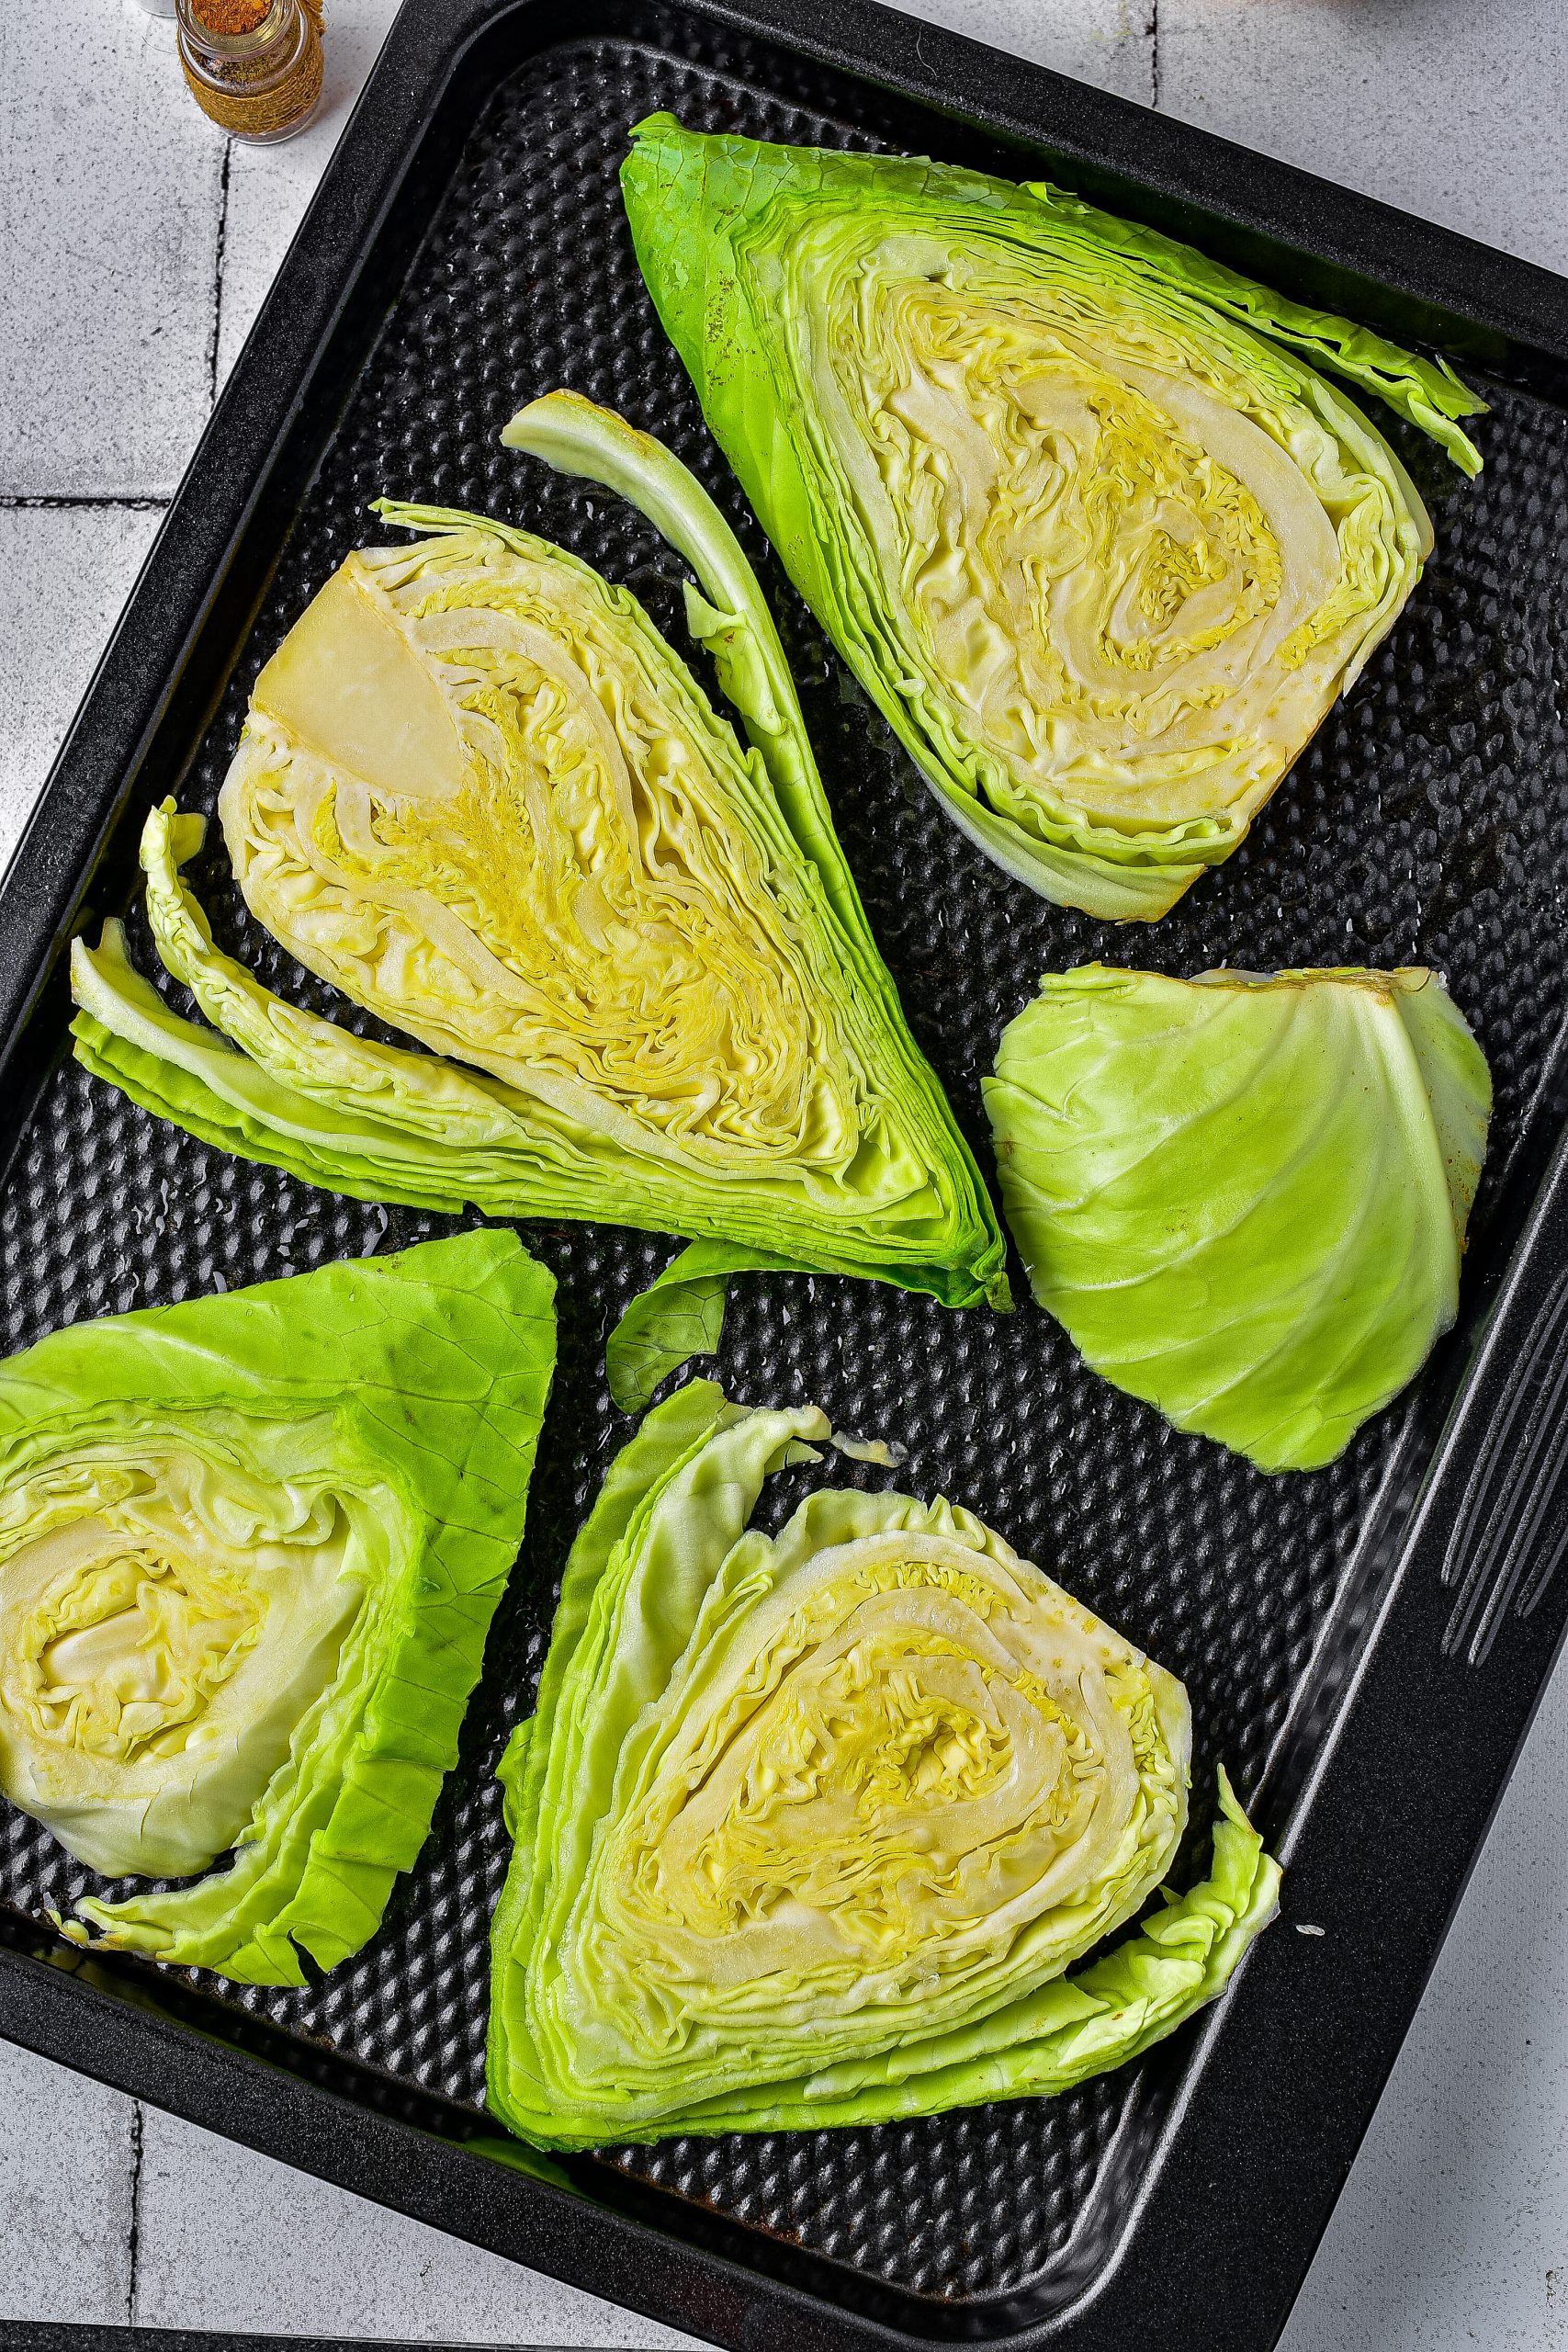 Place the cabbage steaks onto the baking sheet, and drizzle with olive oil